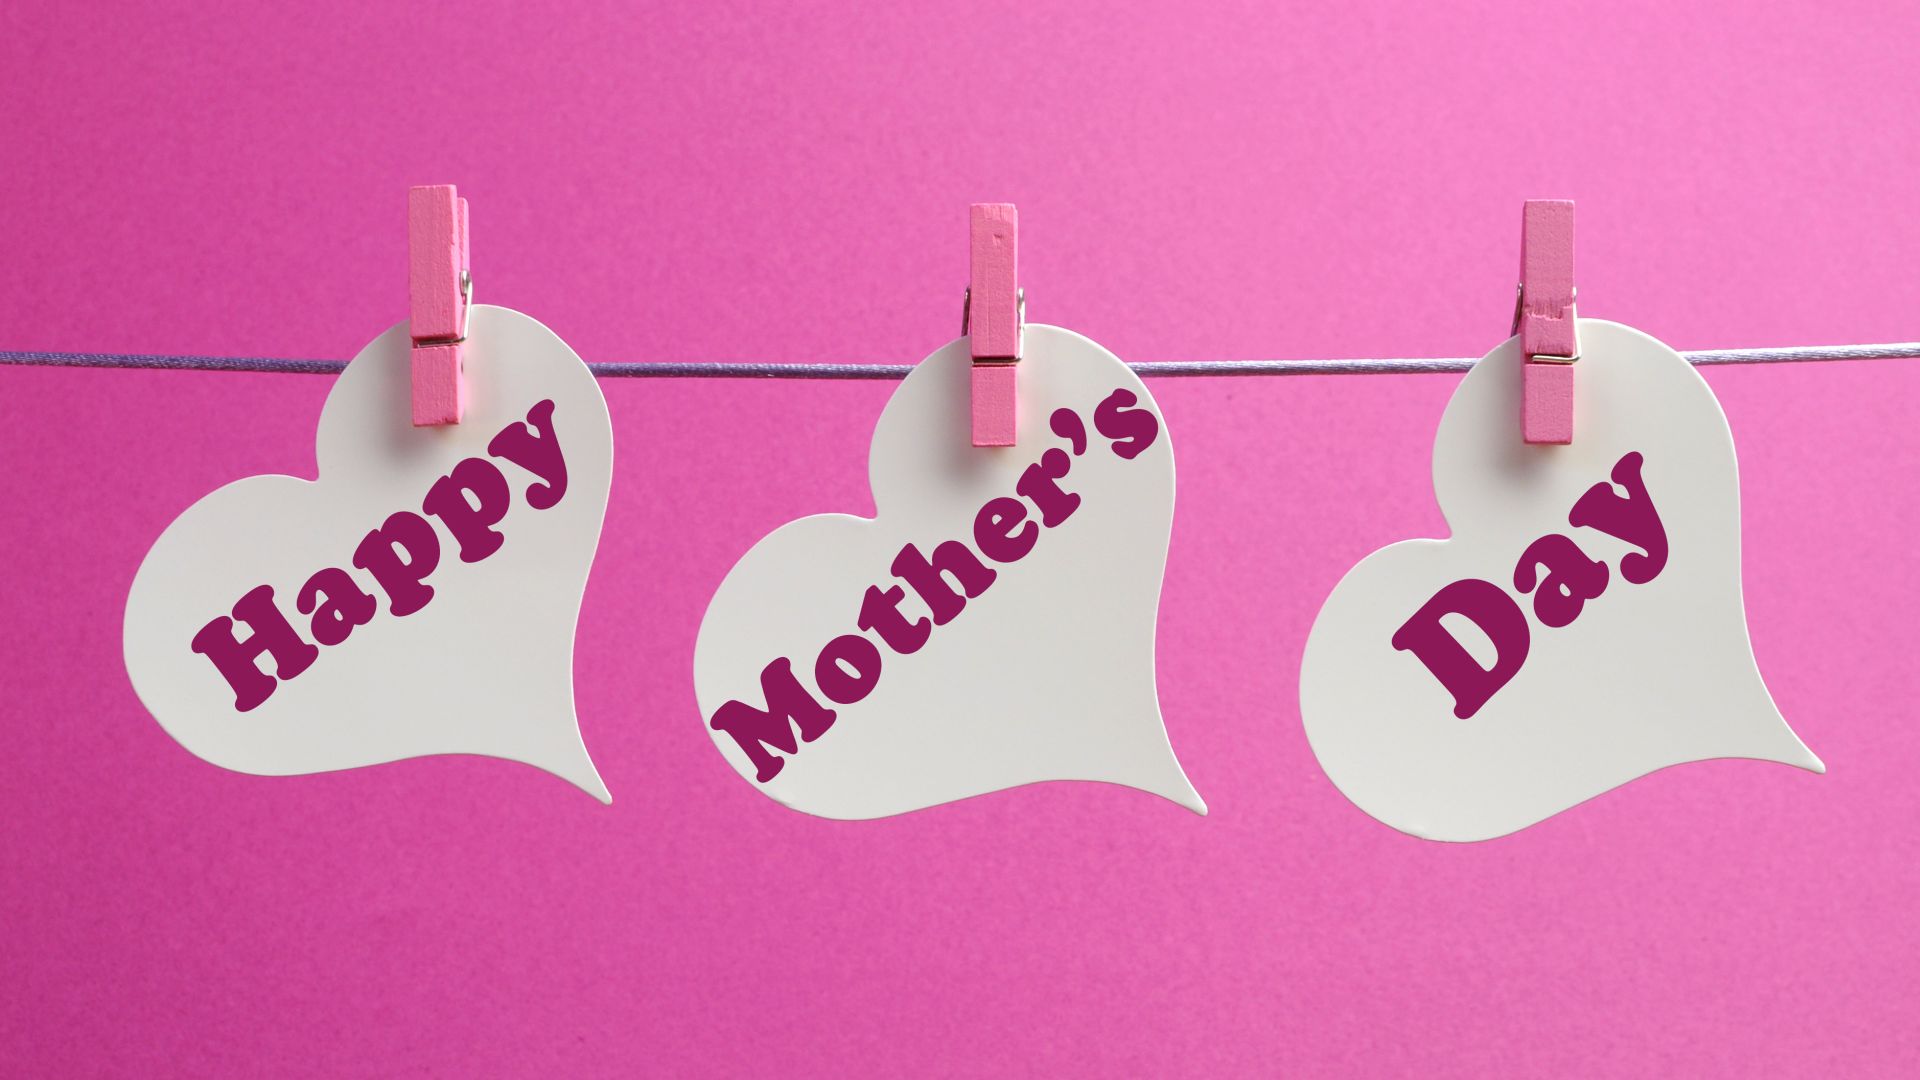 Happy Mothers Day Picture, HD Wallpaper Free Download. Wish